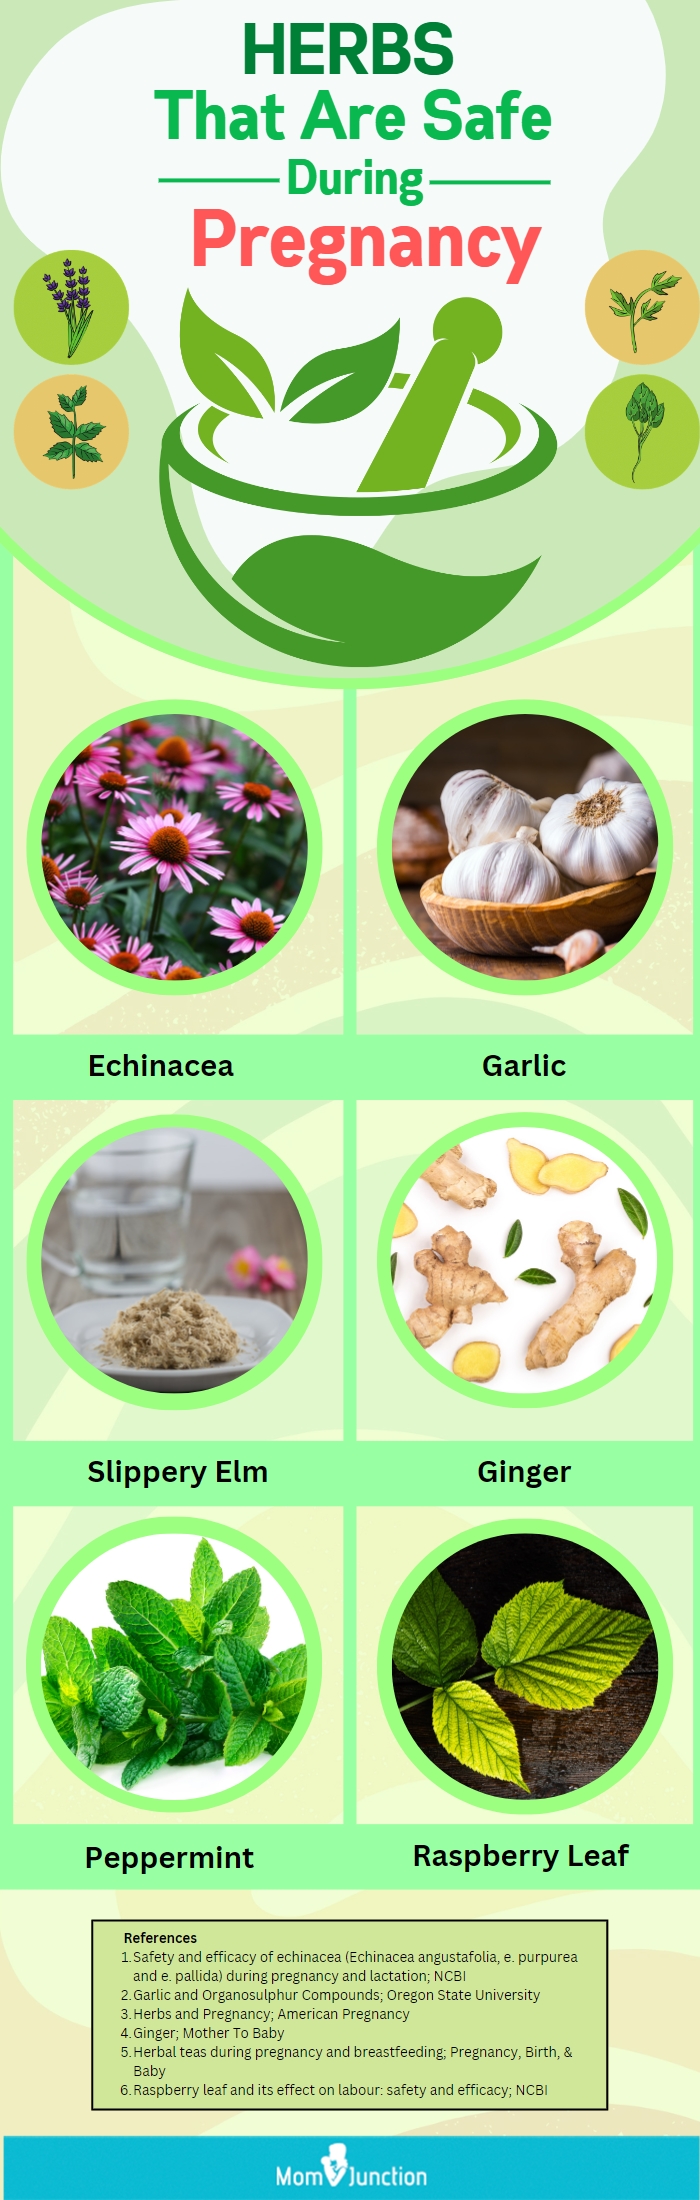 herbs that are safe during pregnancy (infographic)